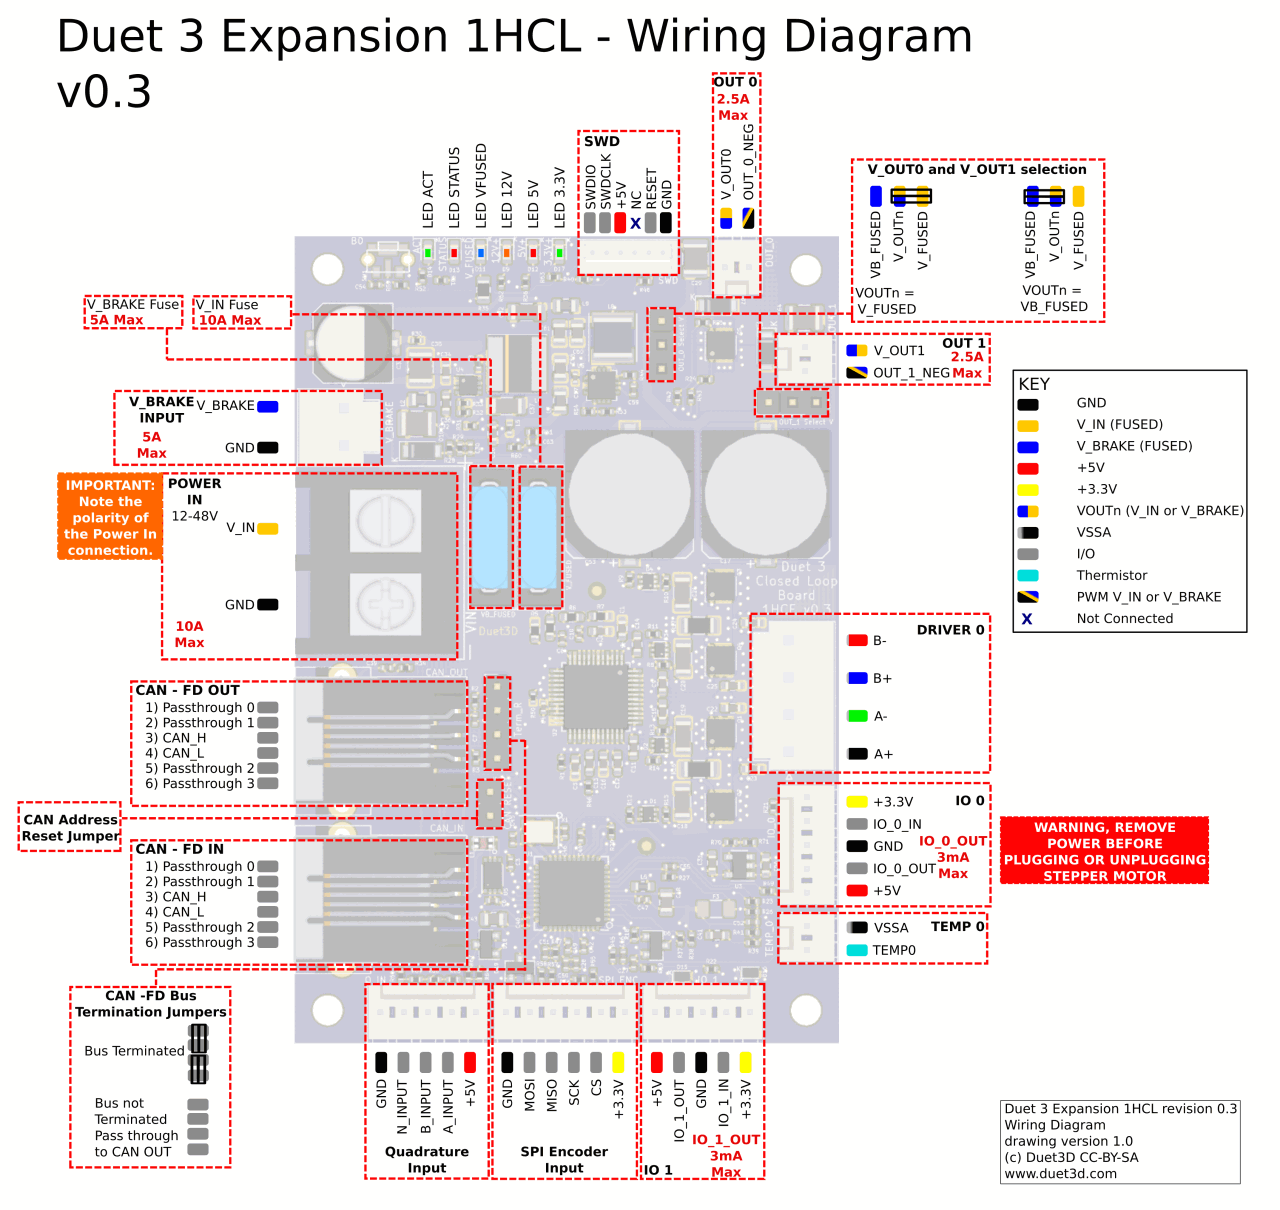 Image showing all the connections on a Duet 3 1HCL prototype v0.3 to aid wiring